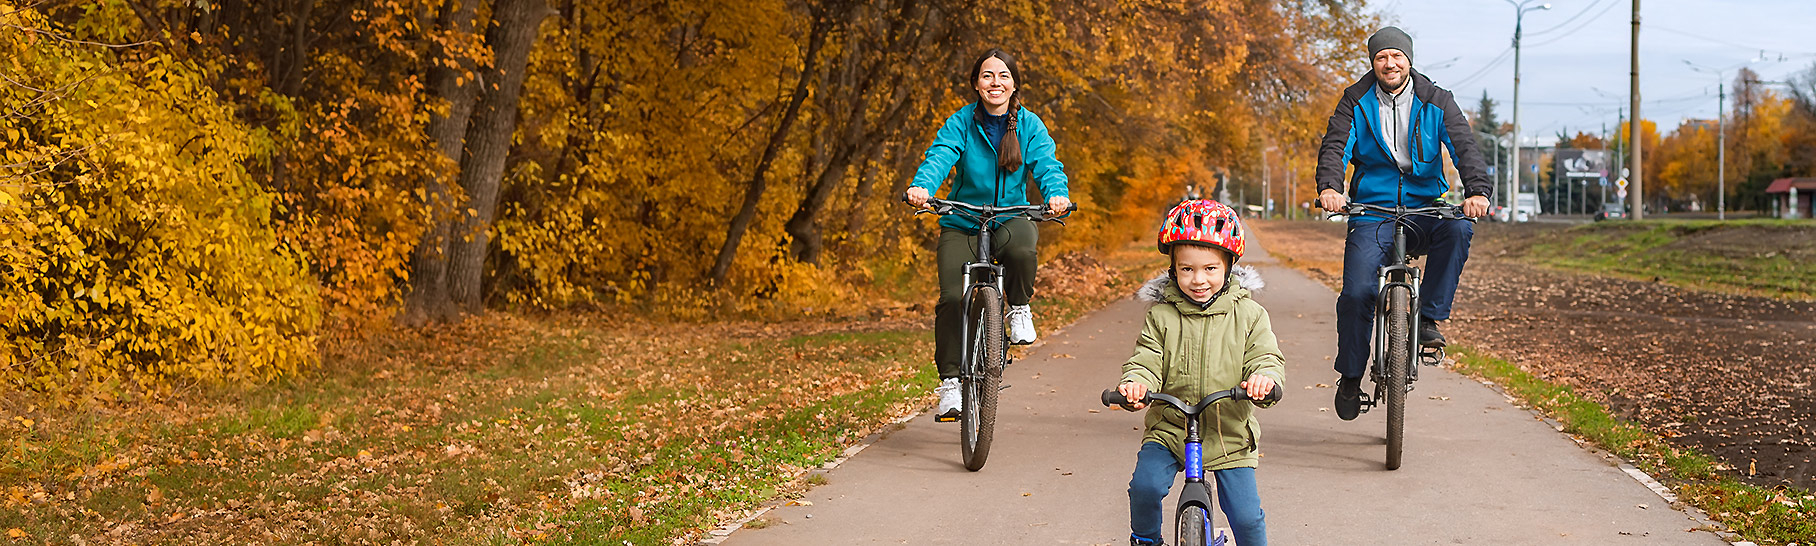 A family of three riding bikes on a cool fall day.